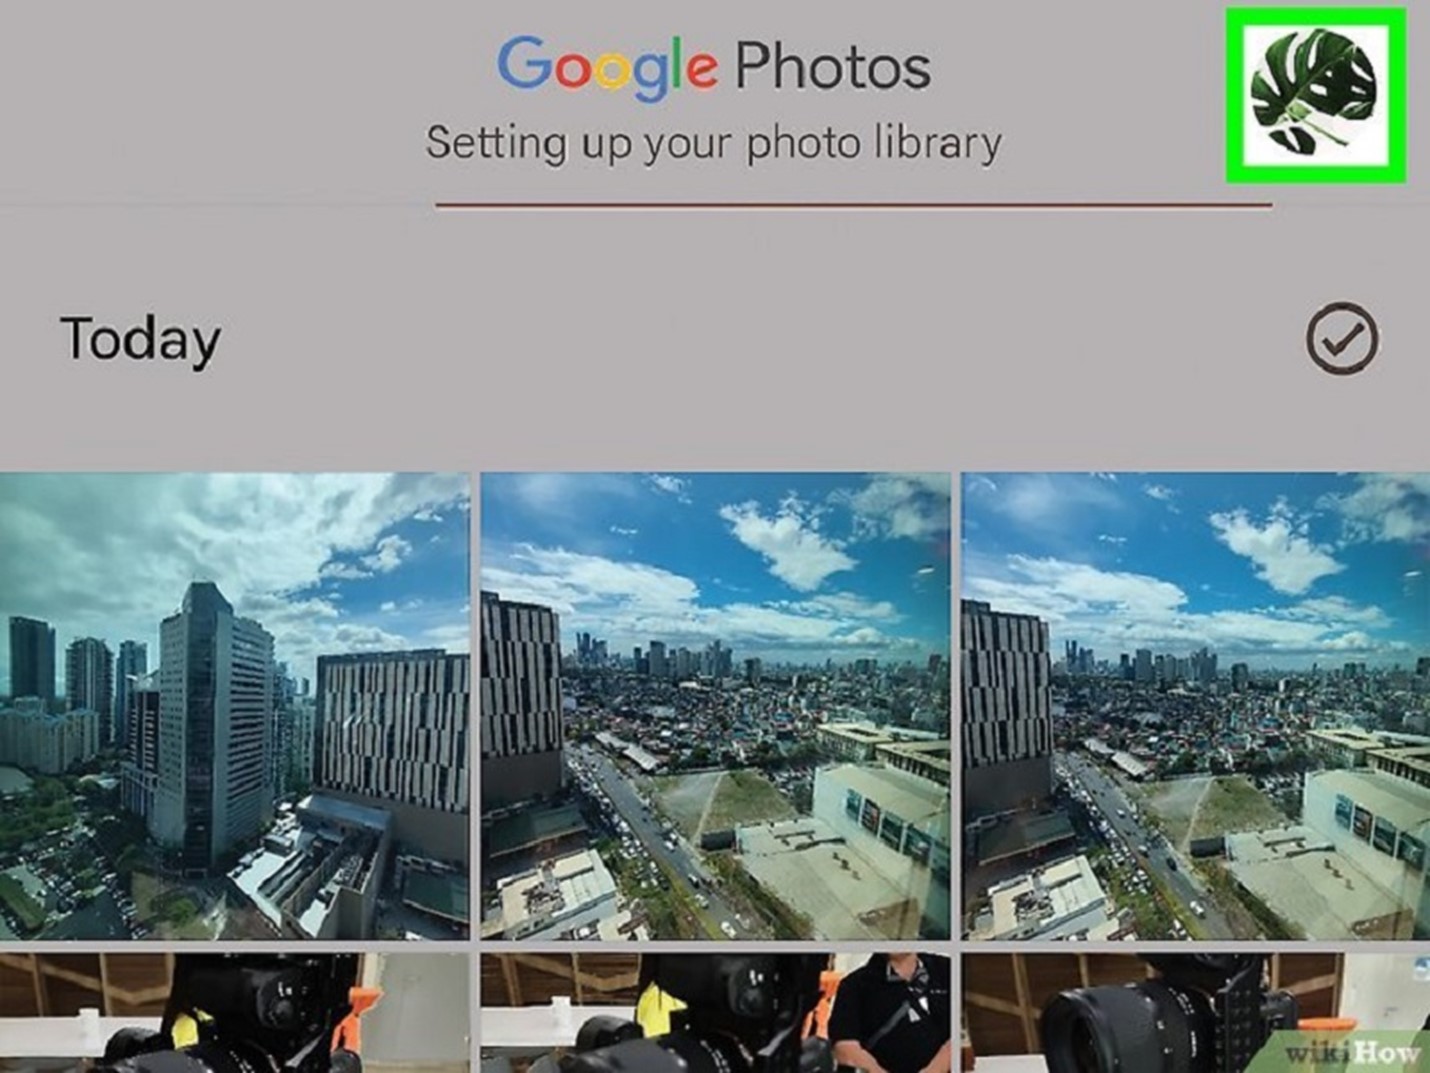 Go to the profile of your Google Photos account to locate settings